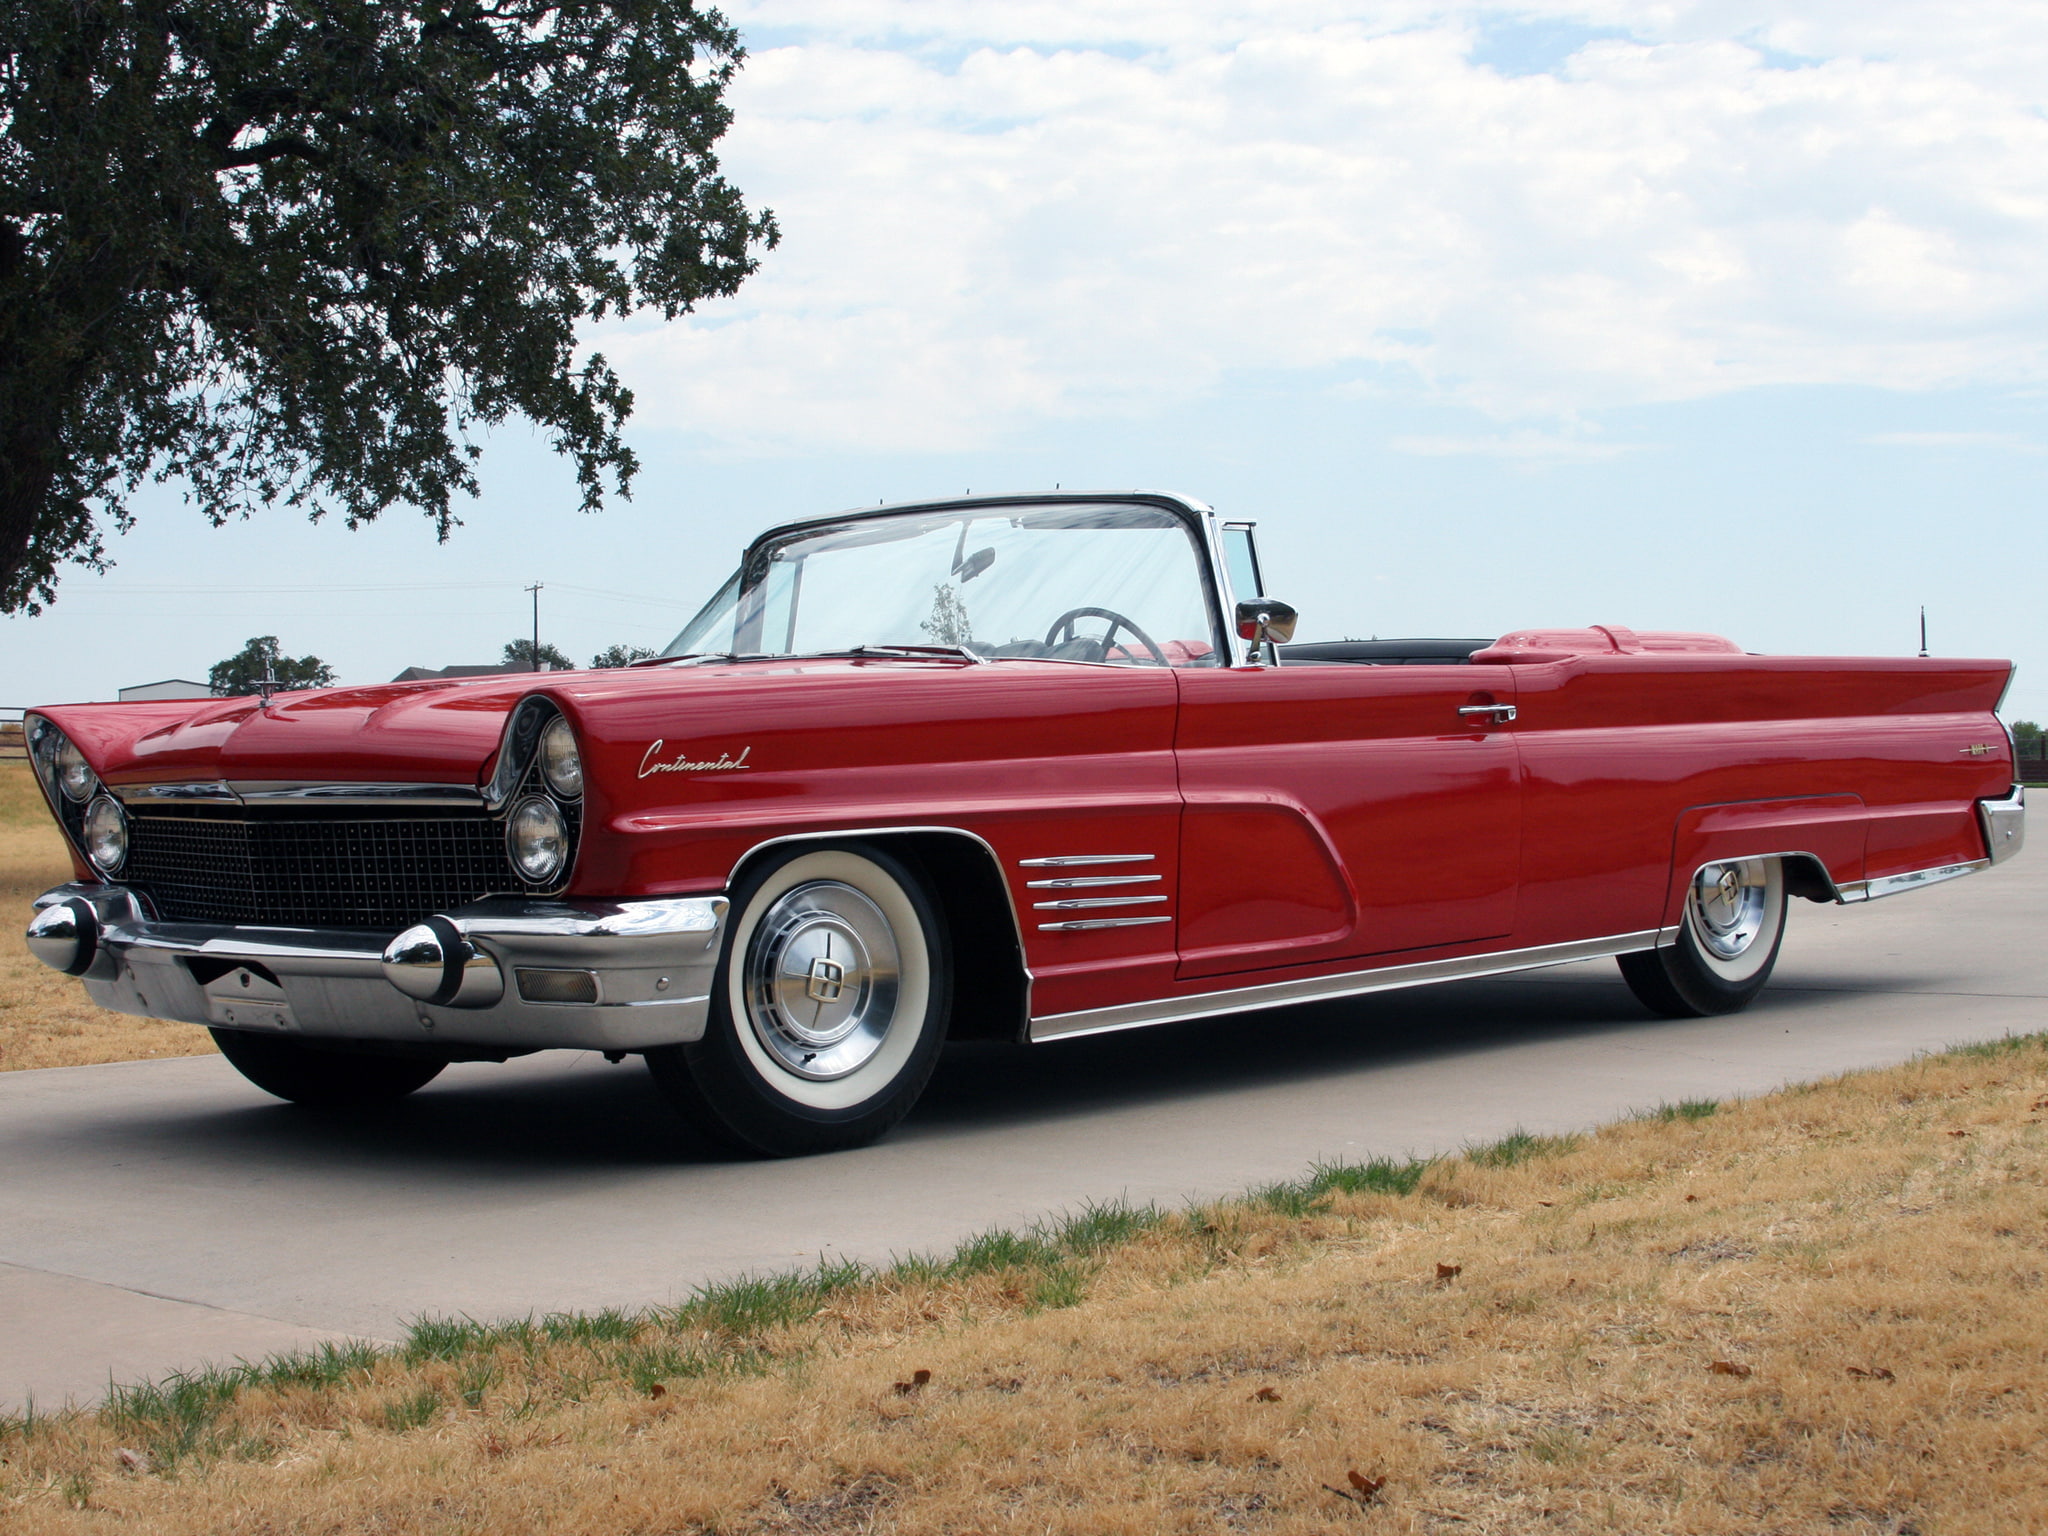 1960, 68a, classic, continental, convertible, lincoln, luxury